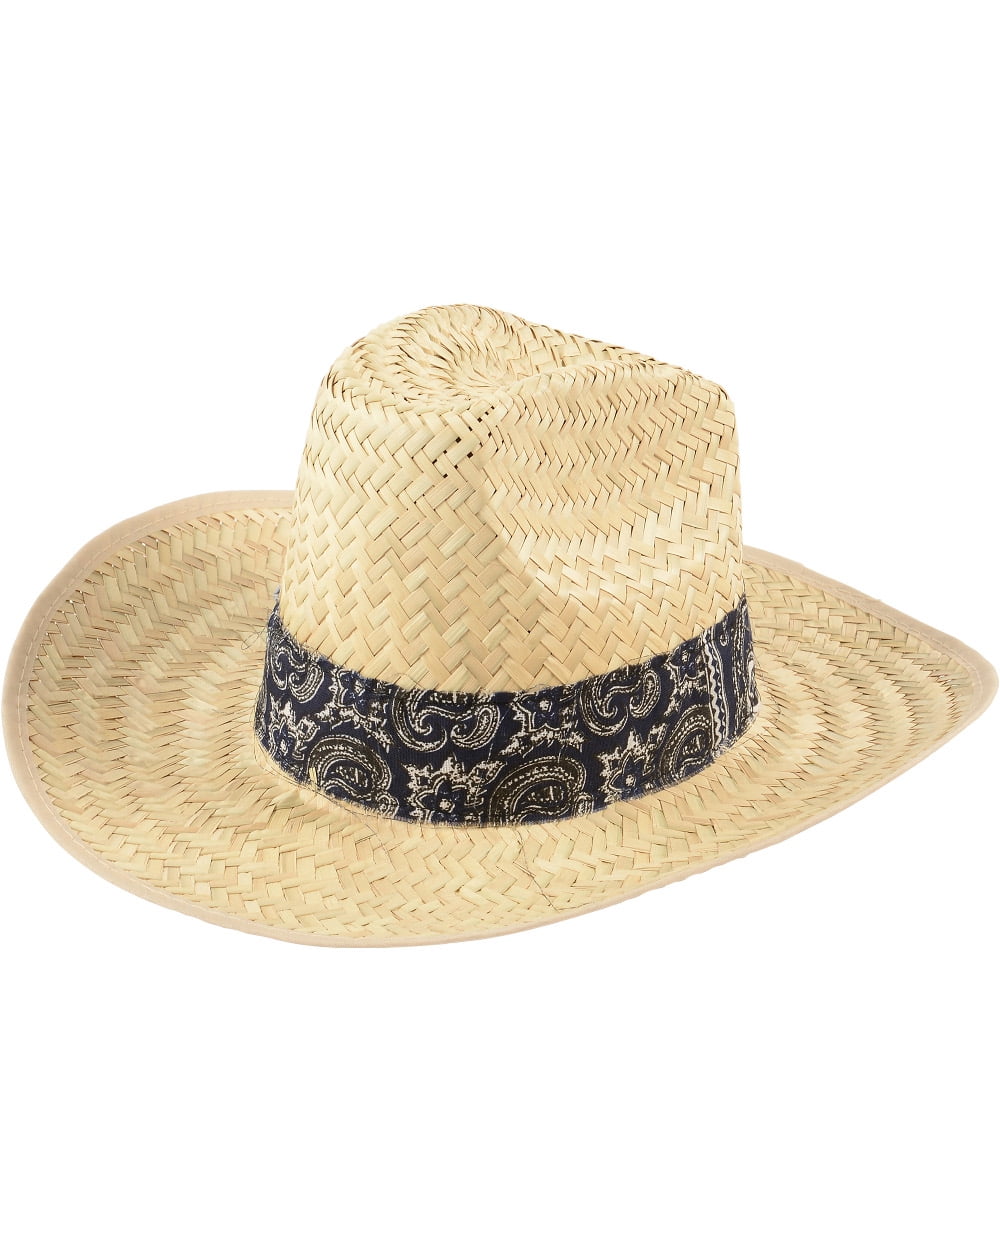 WITHMOONS Fedora Hat Summer Cool Paper Straw Trilby Band For Men 